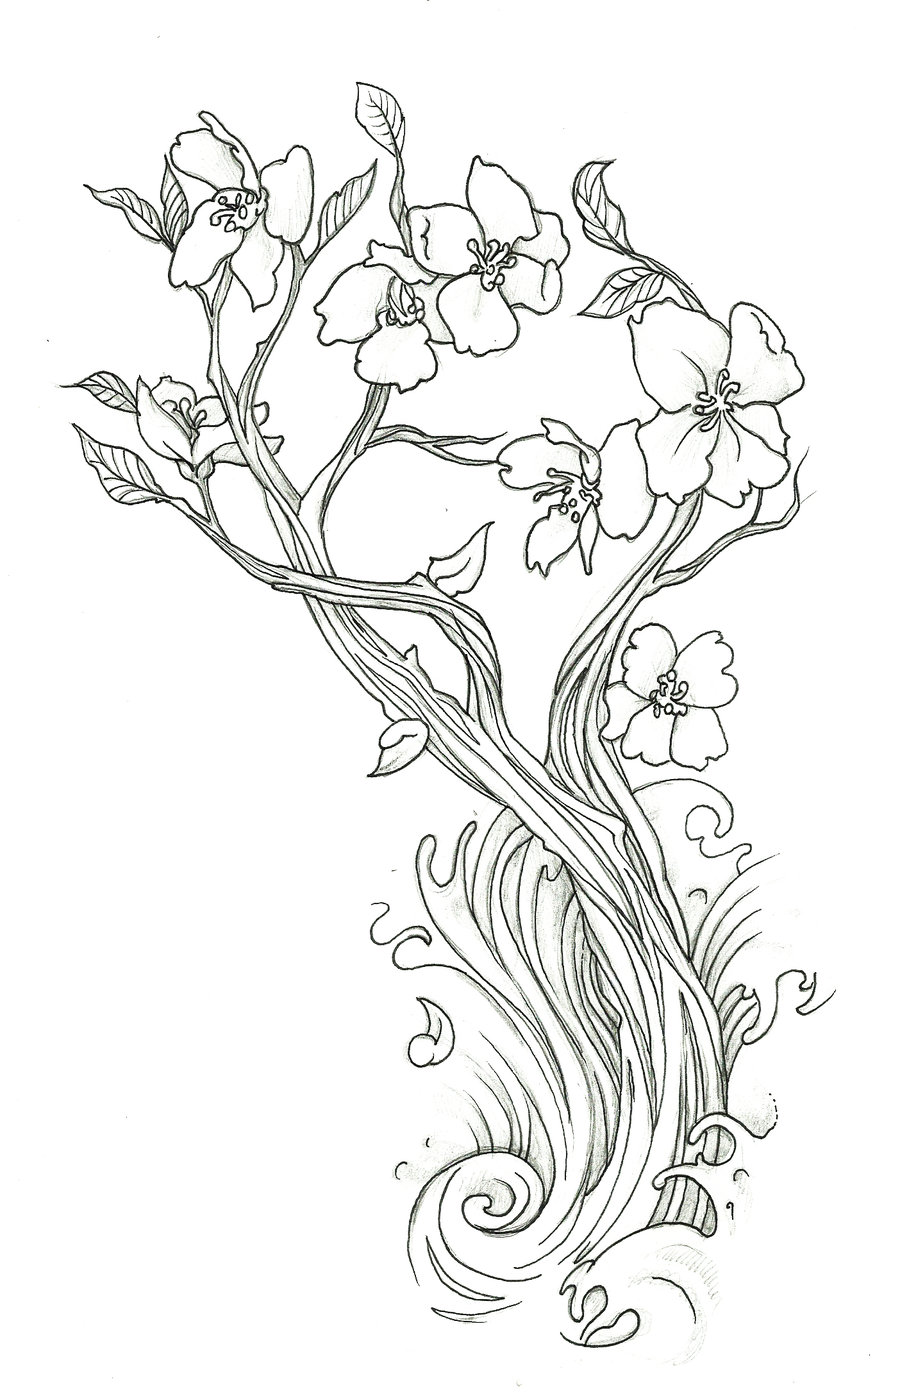 Cherry Blossom Drawing Outline